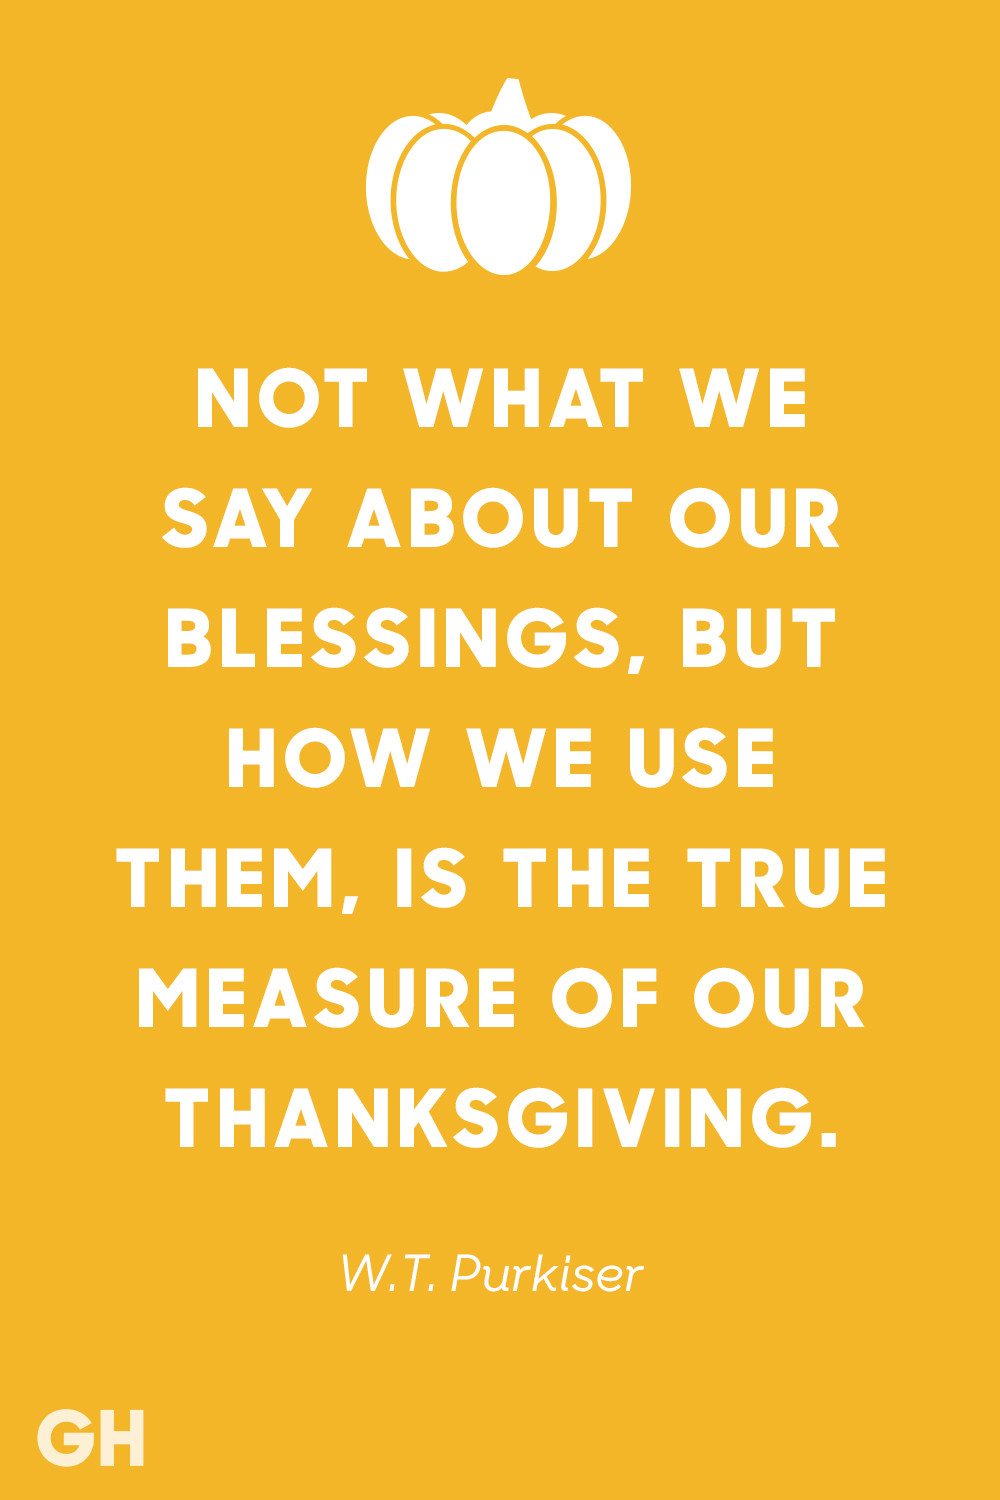 Good Thanksgiving Quotes
 15 Best Thanksgiving Quotes Inspirational and Funny